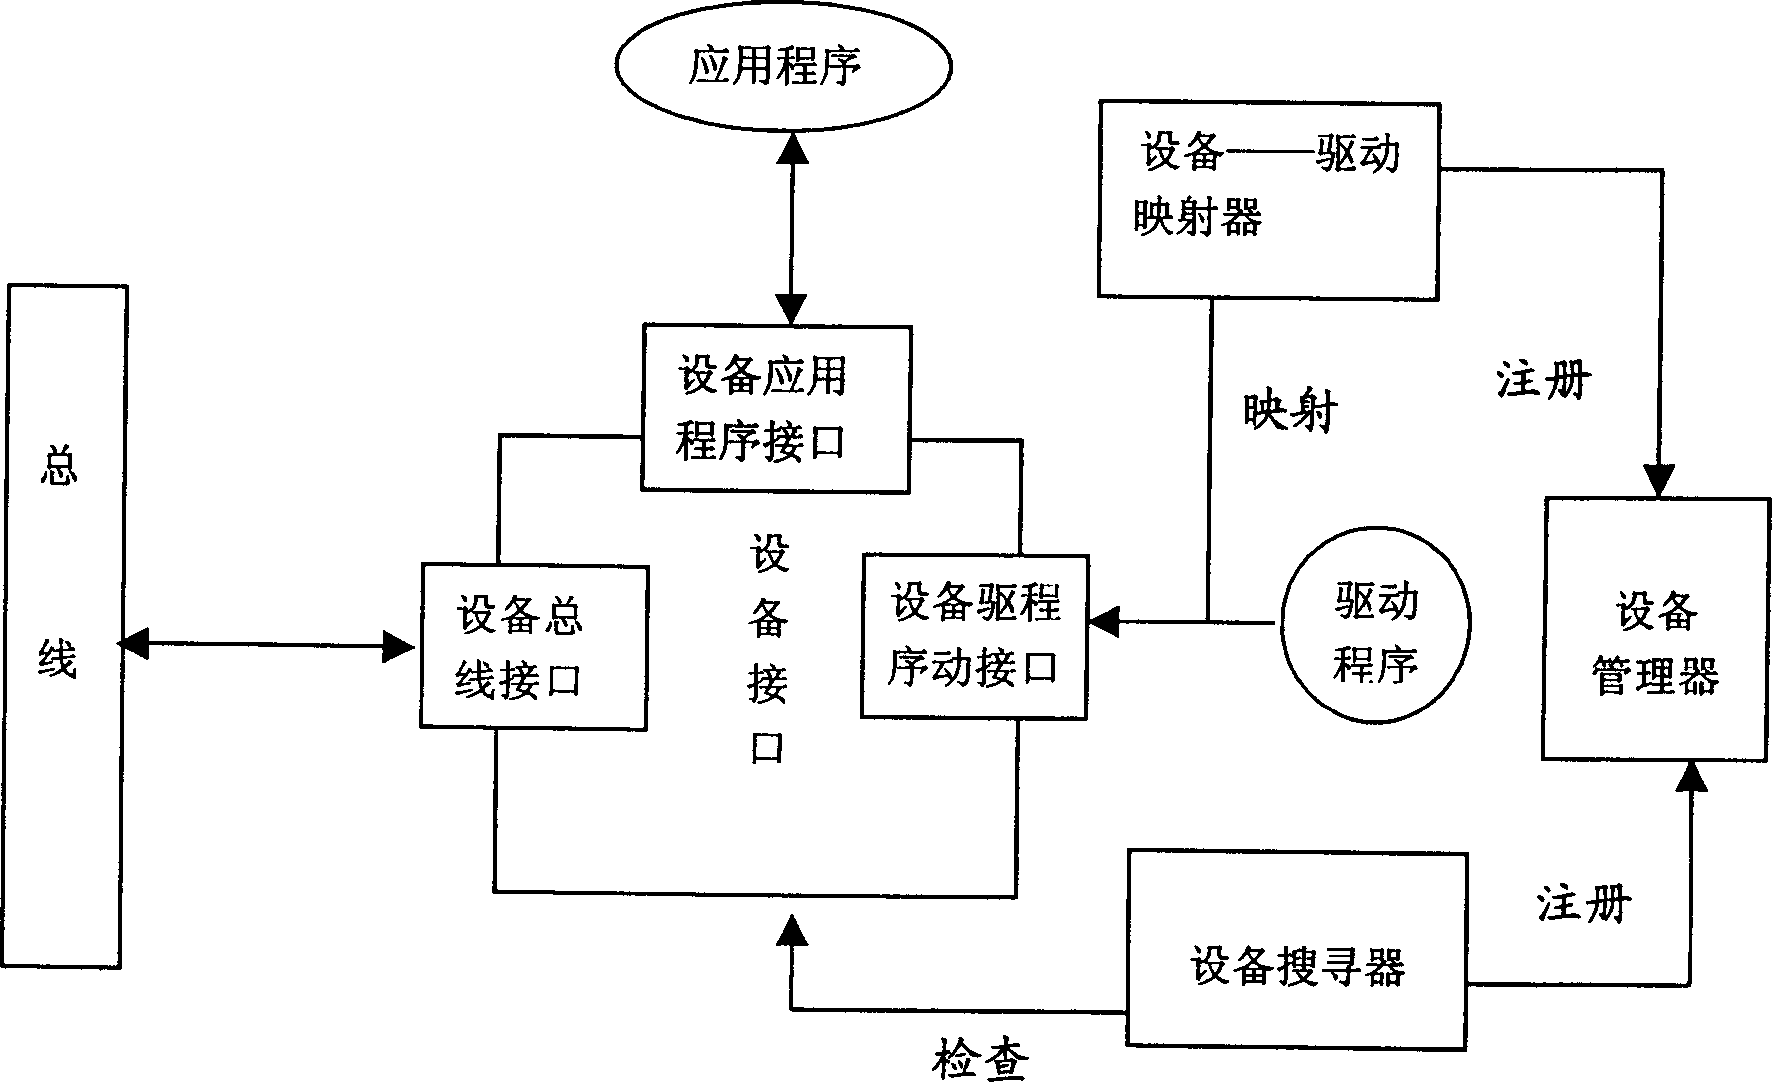 Equipment support implementing method applied in Java operation system